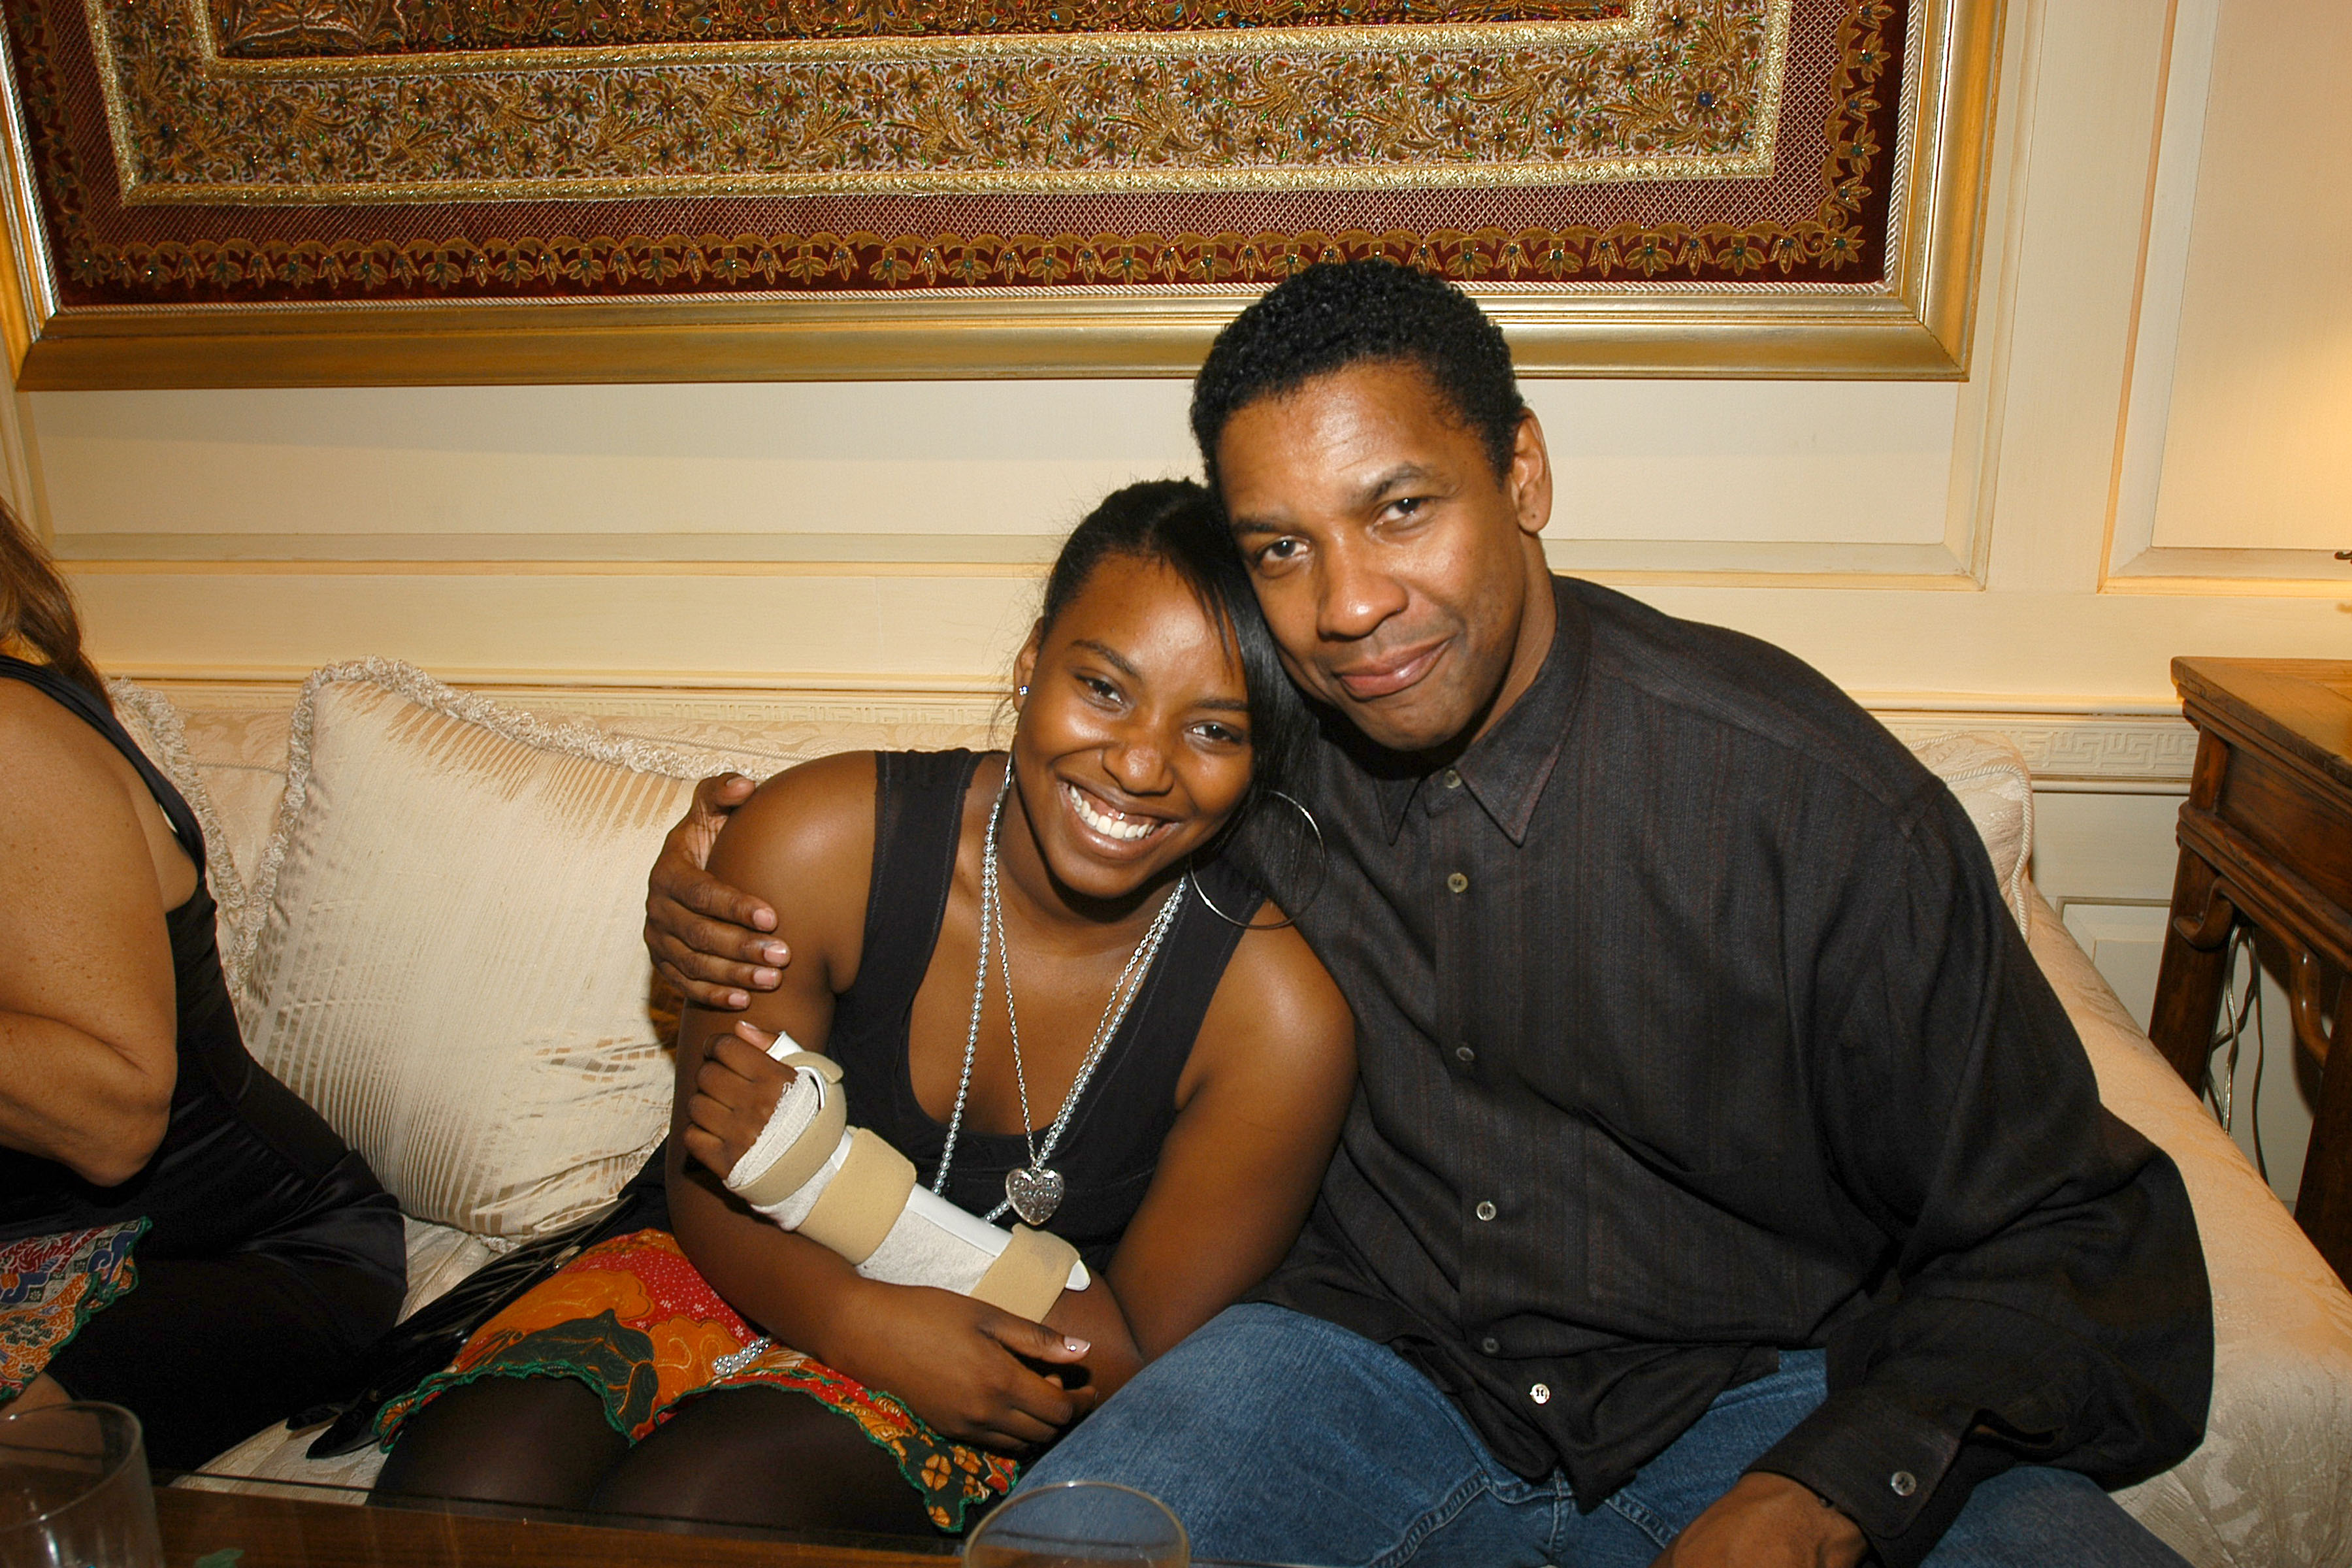 Olivia and Denzel Washington at Richard Turley's birthday dinner in New York City on December 21, 2006 | Source: Getty Images